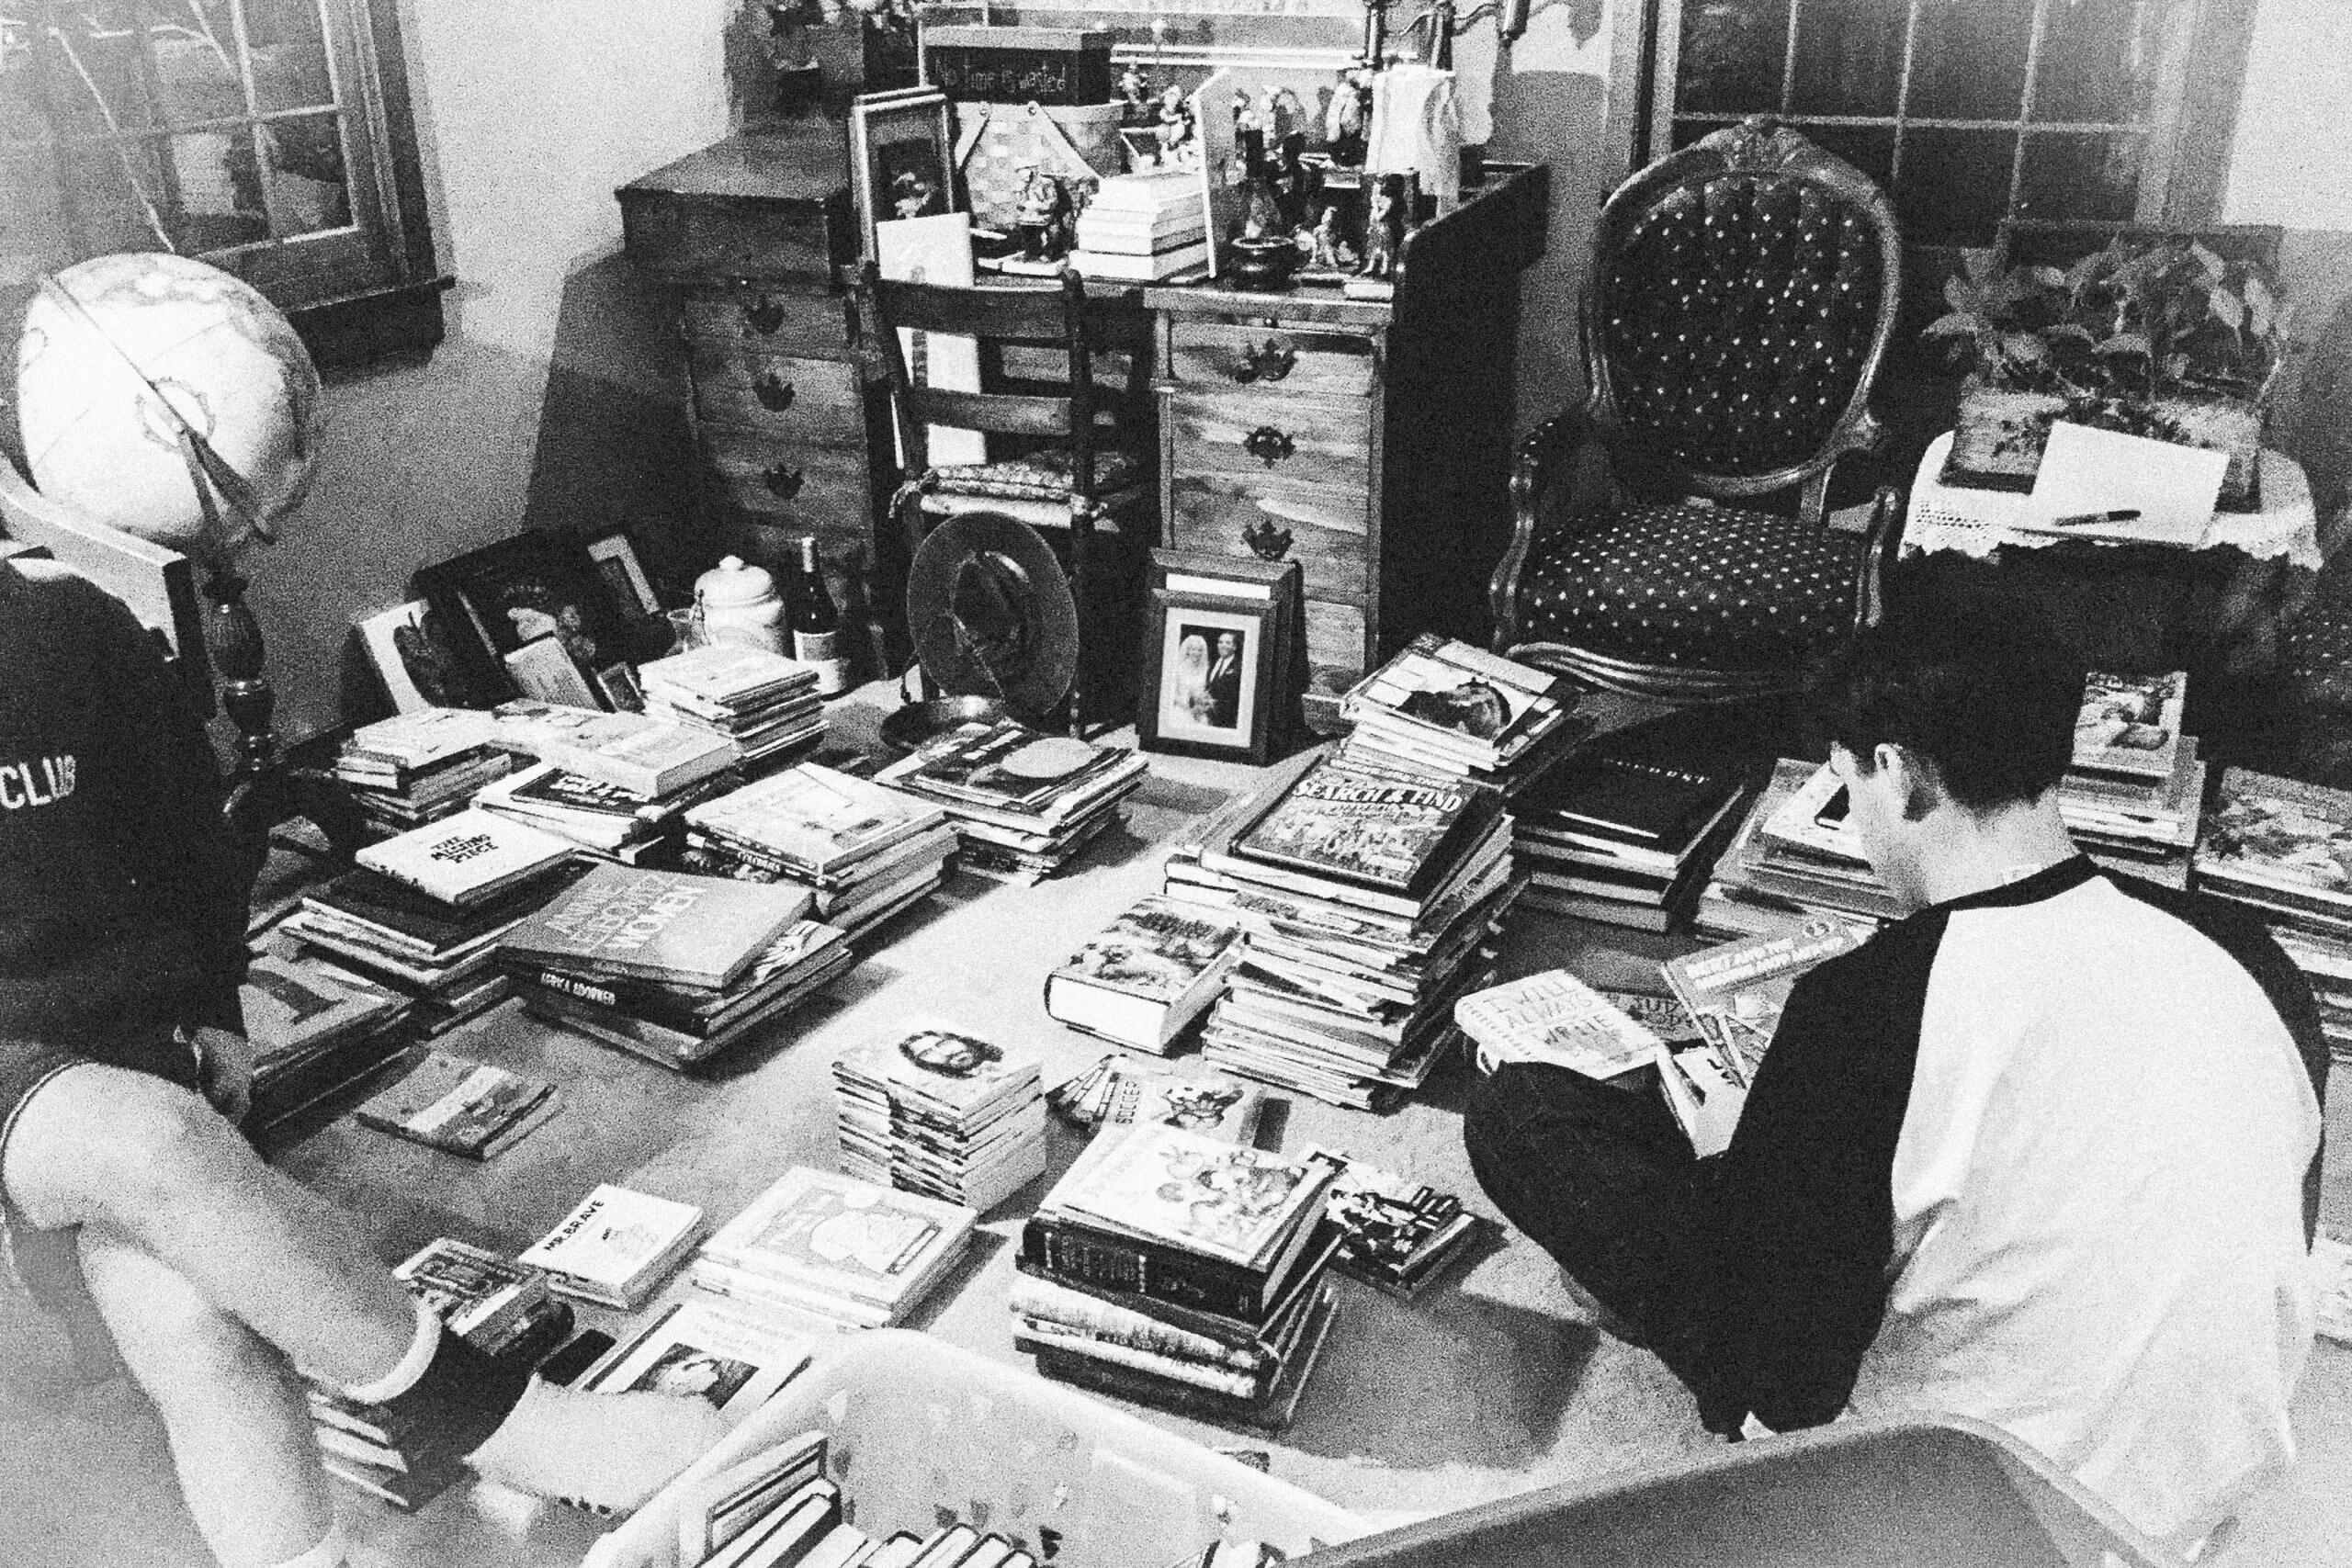 Black and white grainy image of a room filled with stacks of books and stuff. A white man sits on the floor and goes through the books.